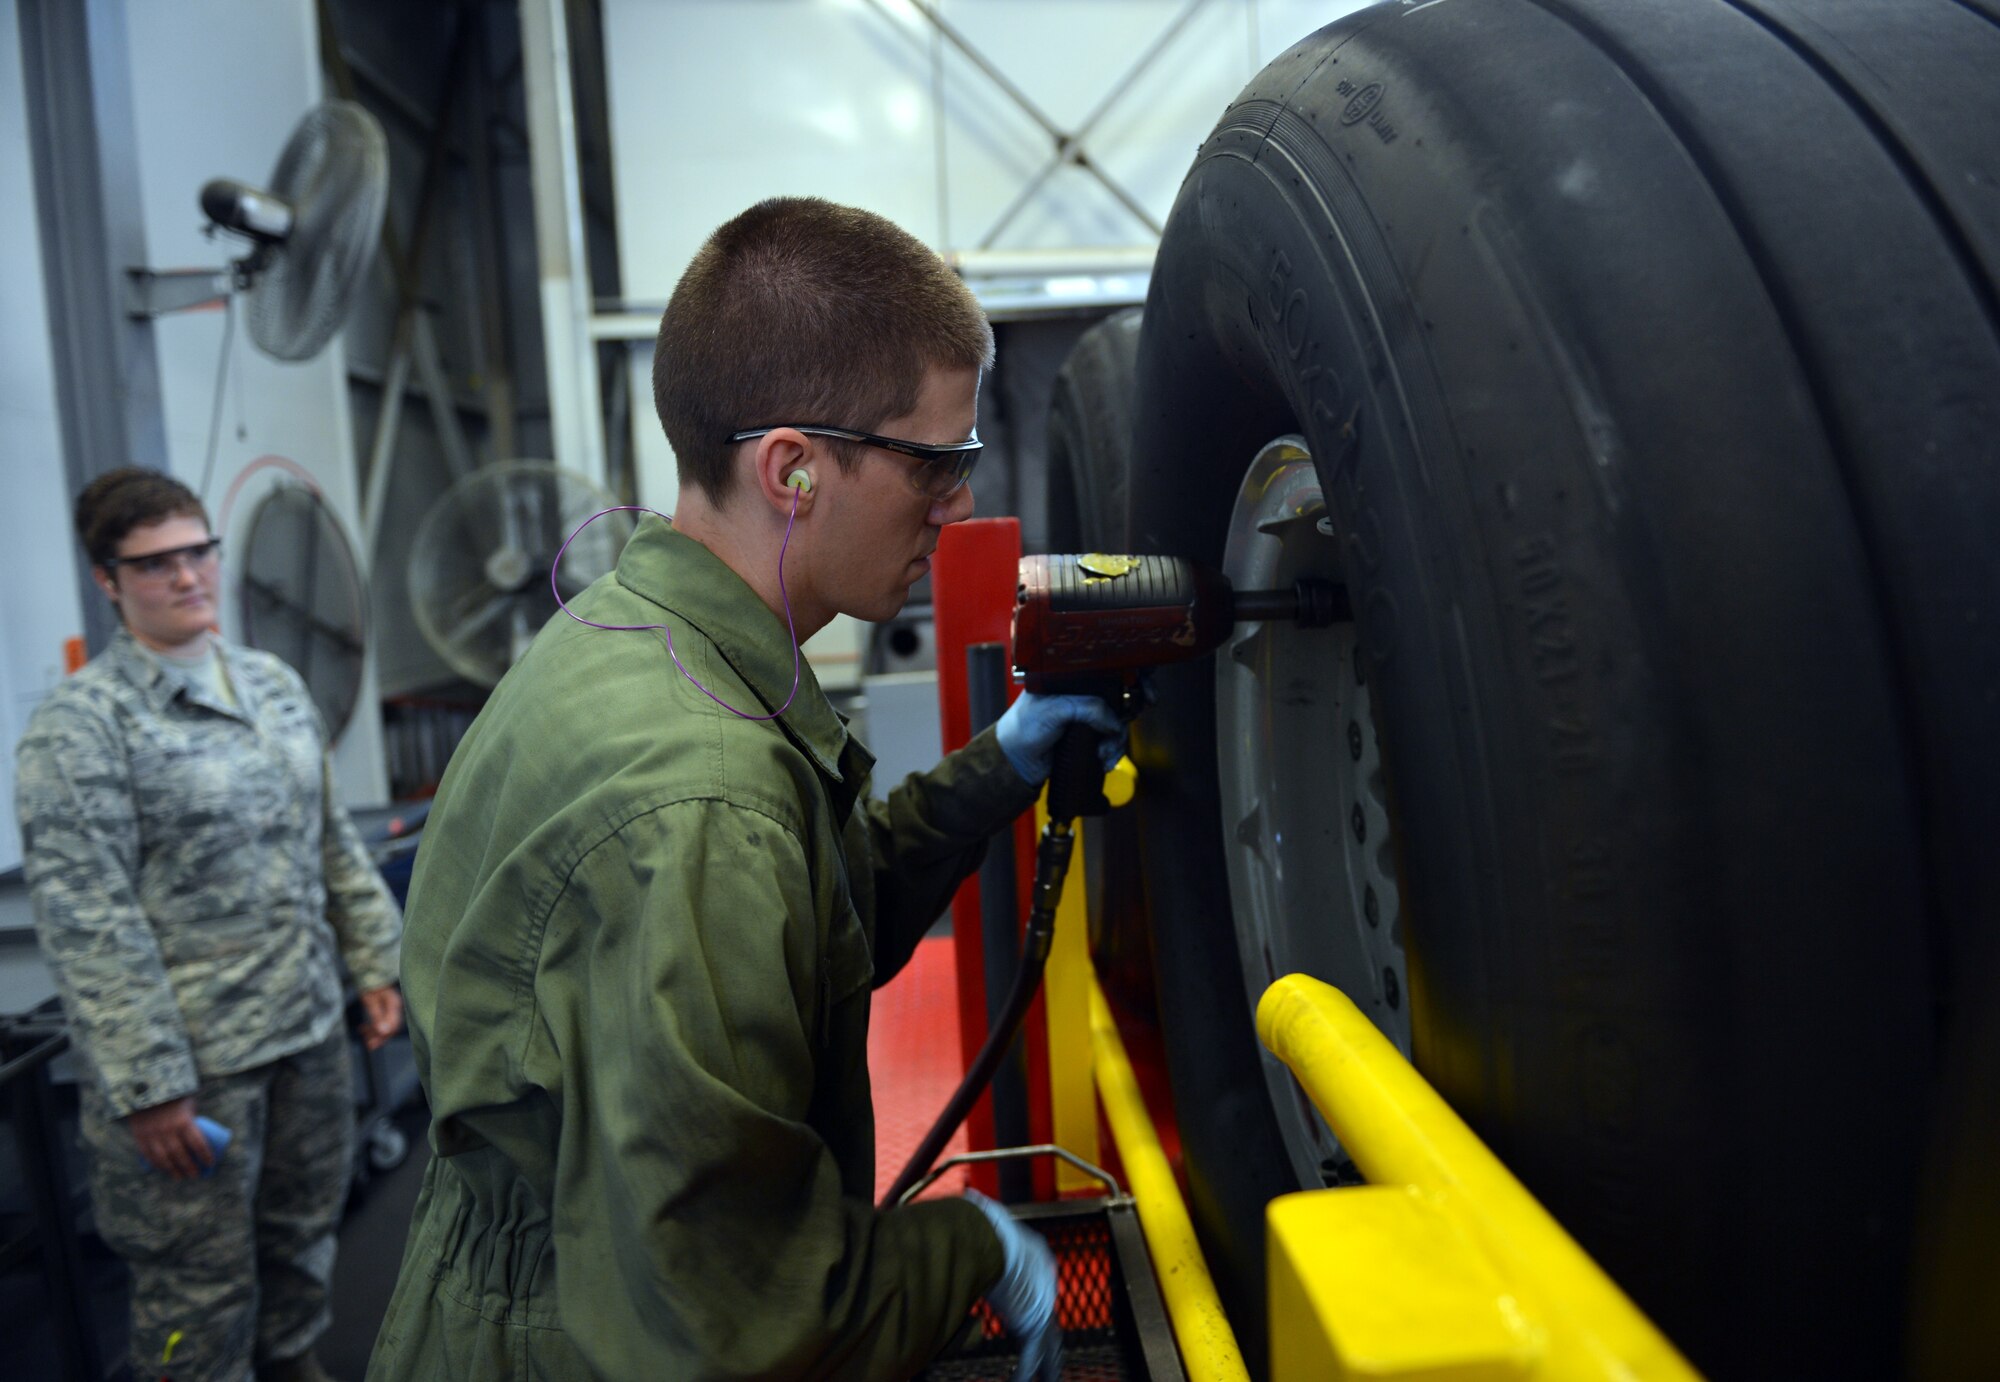 Staff Sgt. Christopher Hirsch, 62nd Maintenance Squadron aerospace maintenance journeyman, removes wheel bolts and studs from a C-17 Globemaster III wheel assembly Aug. 1, 2013, at Joint Base Lewis-McChord, Wash. Wheel and tire technicians maintain tire assemblies on 48 of McChord Field’s permanently assigned aircraft, equating to roughly 1,300 maintenance actions annually. (U.S. Air Force photo/Staff Sgt. Jason Truskowski)